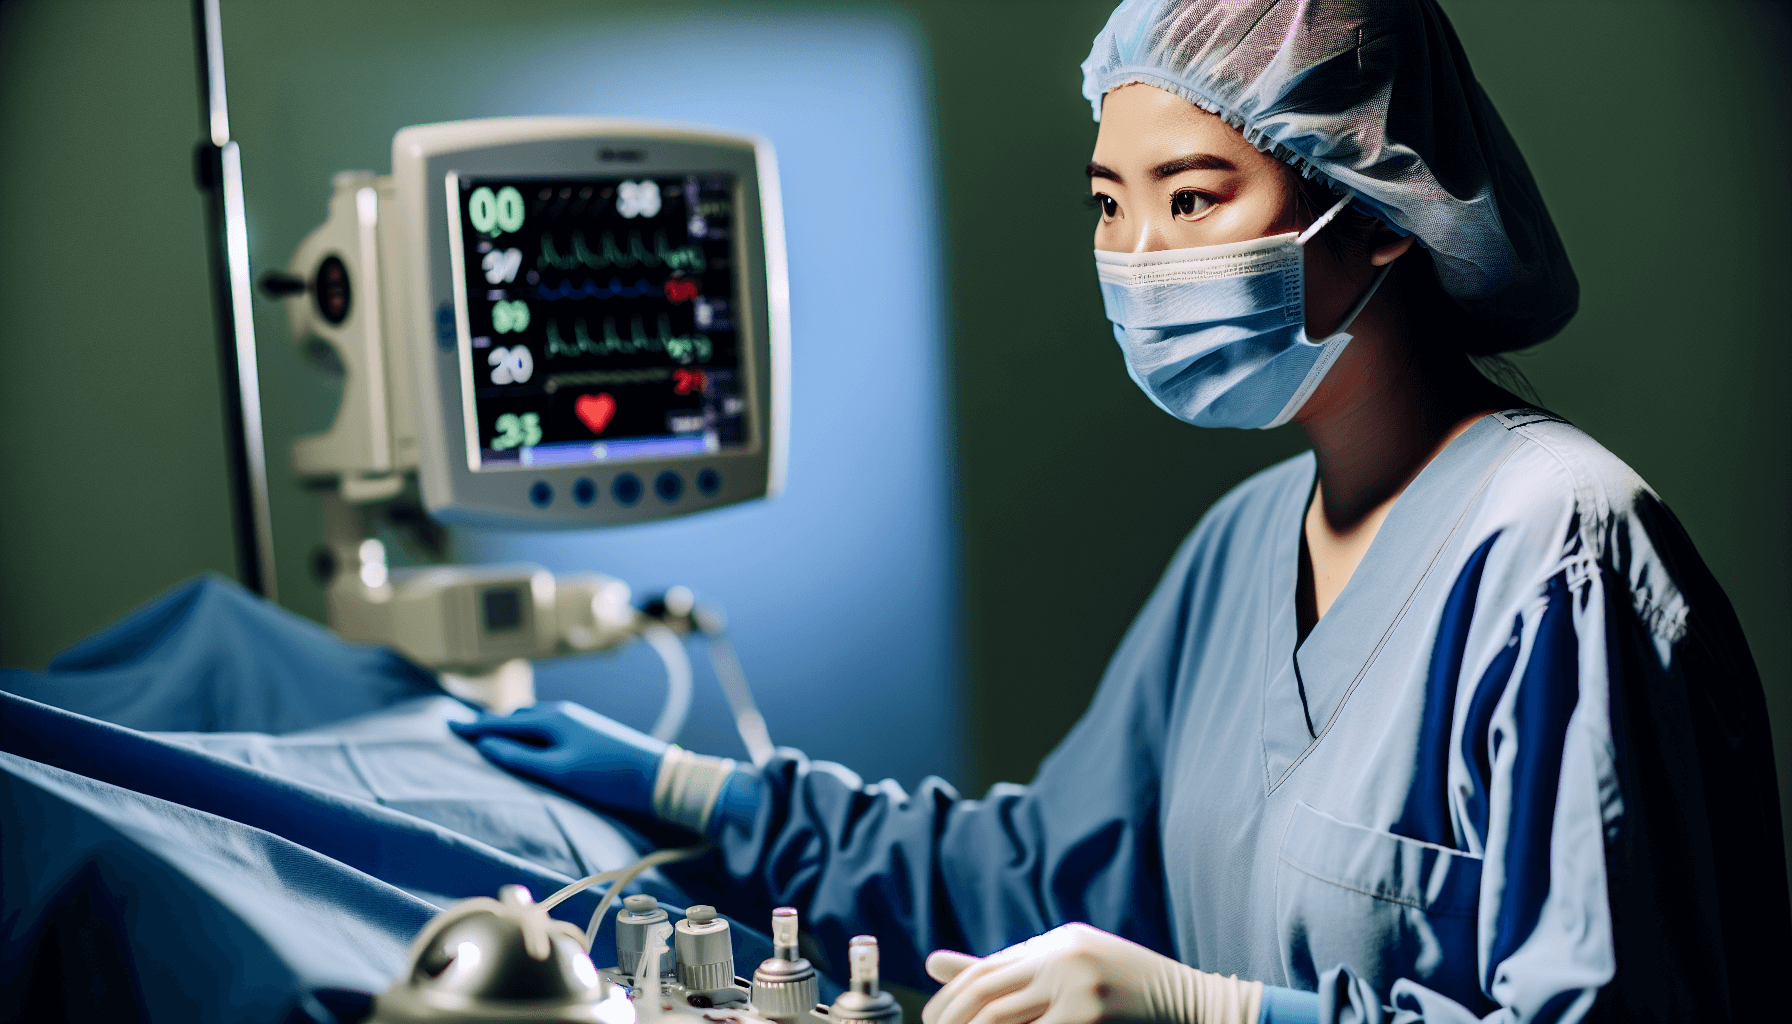 Medical professional monitoring patient-s vital signs during surgery